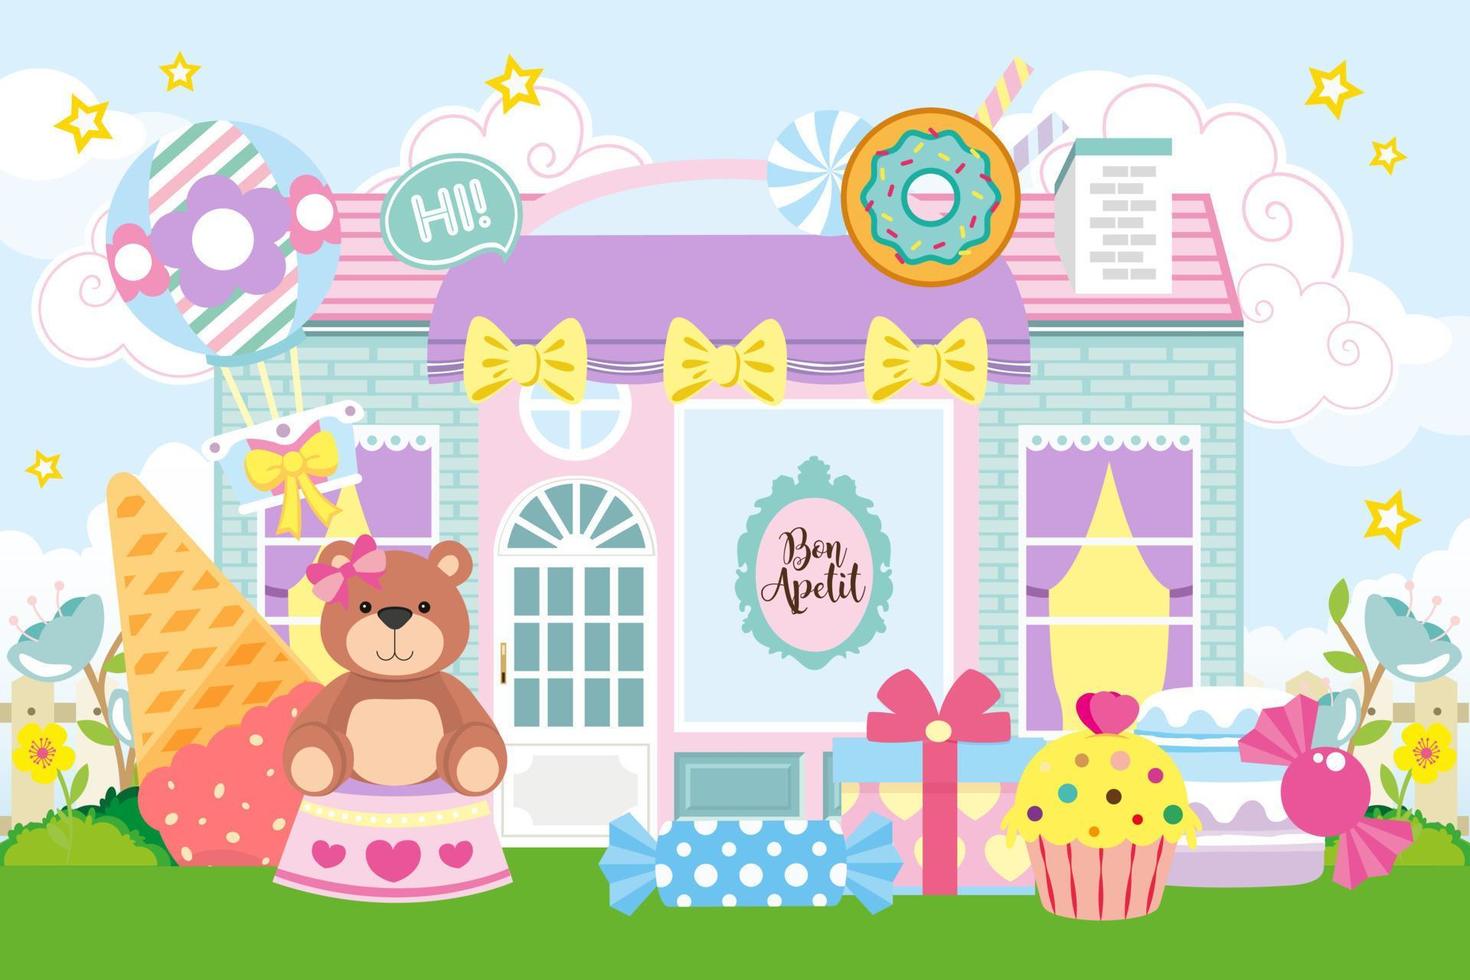 Cake shop illustration with cute bear and cakes vector